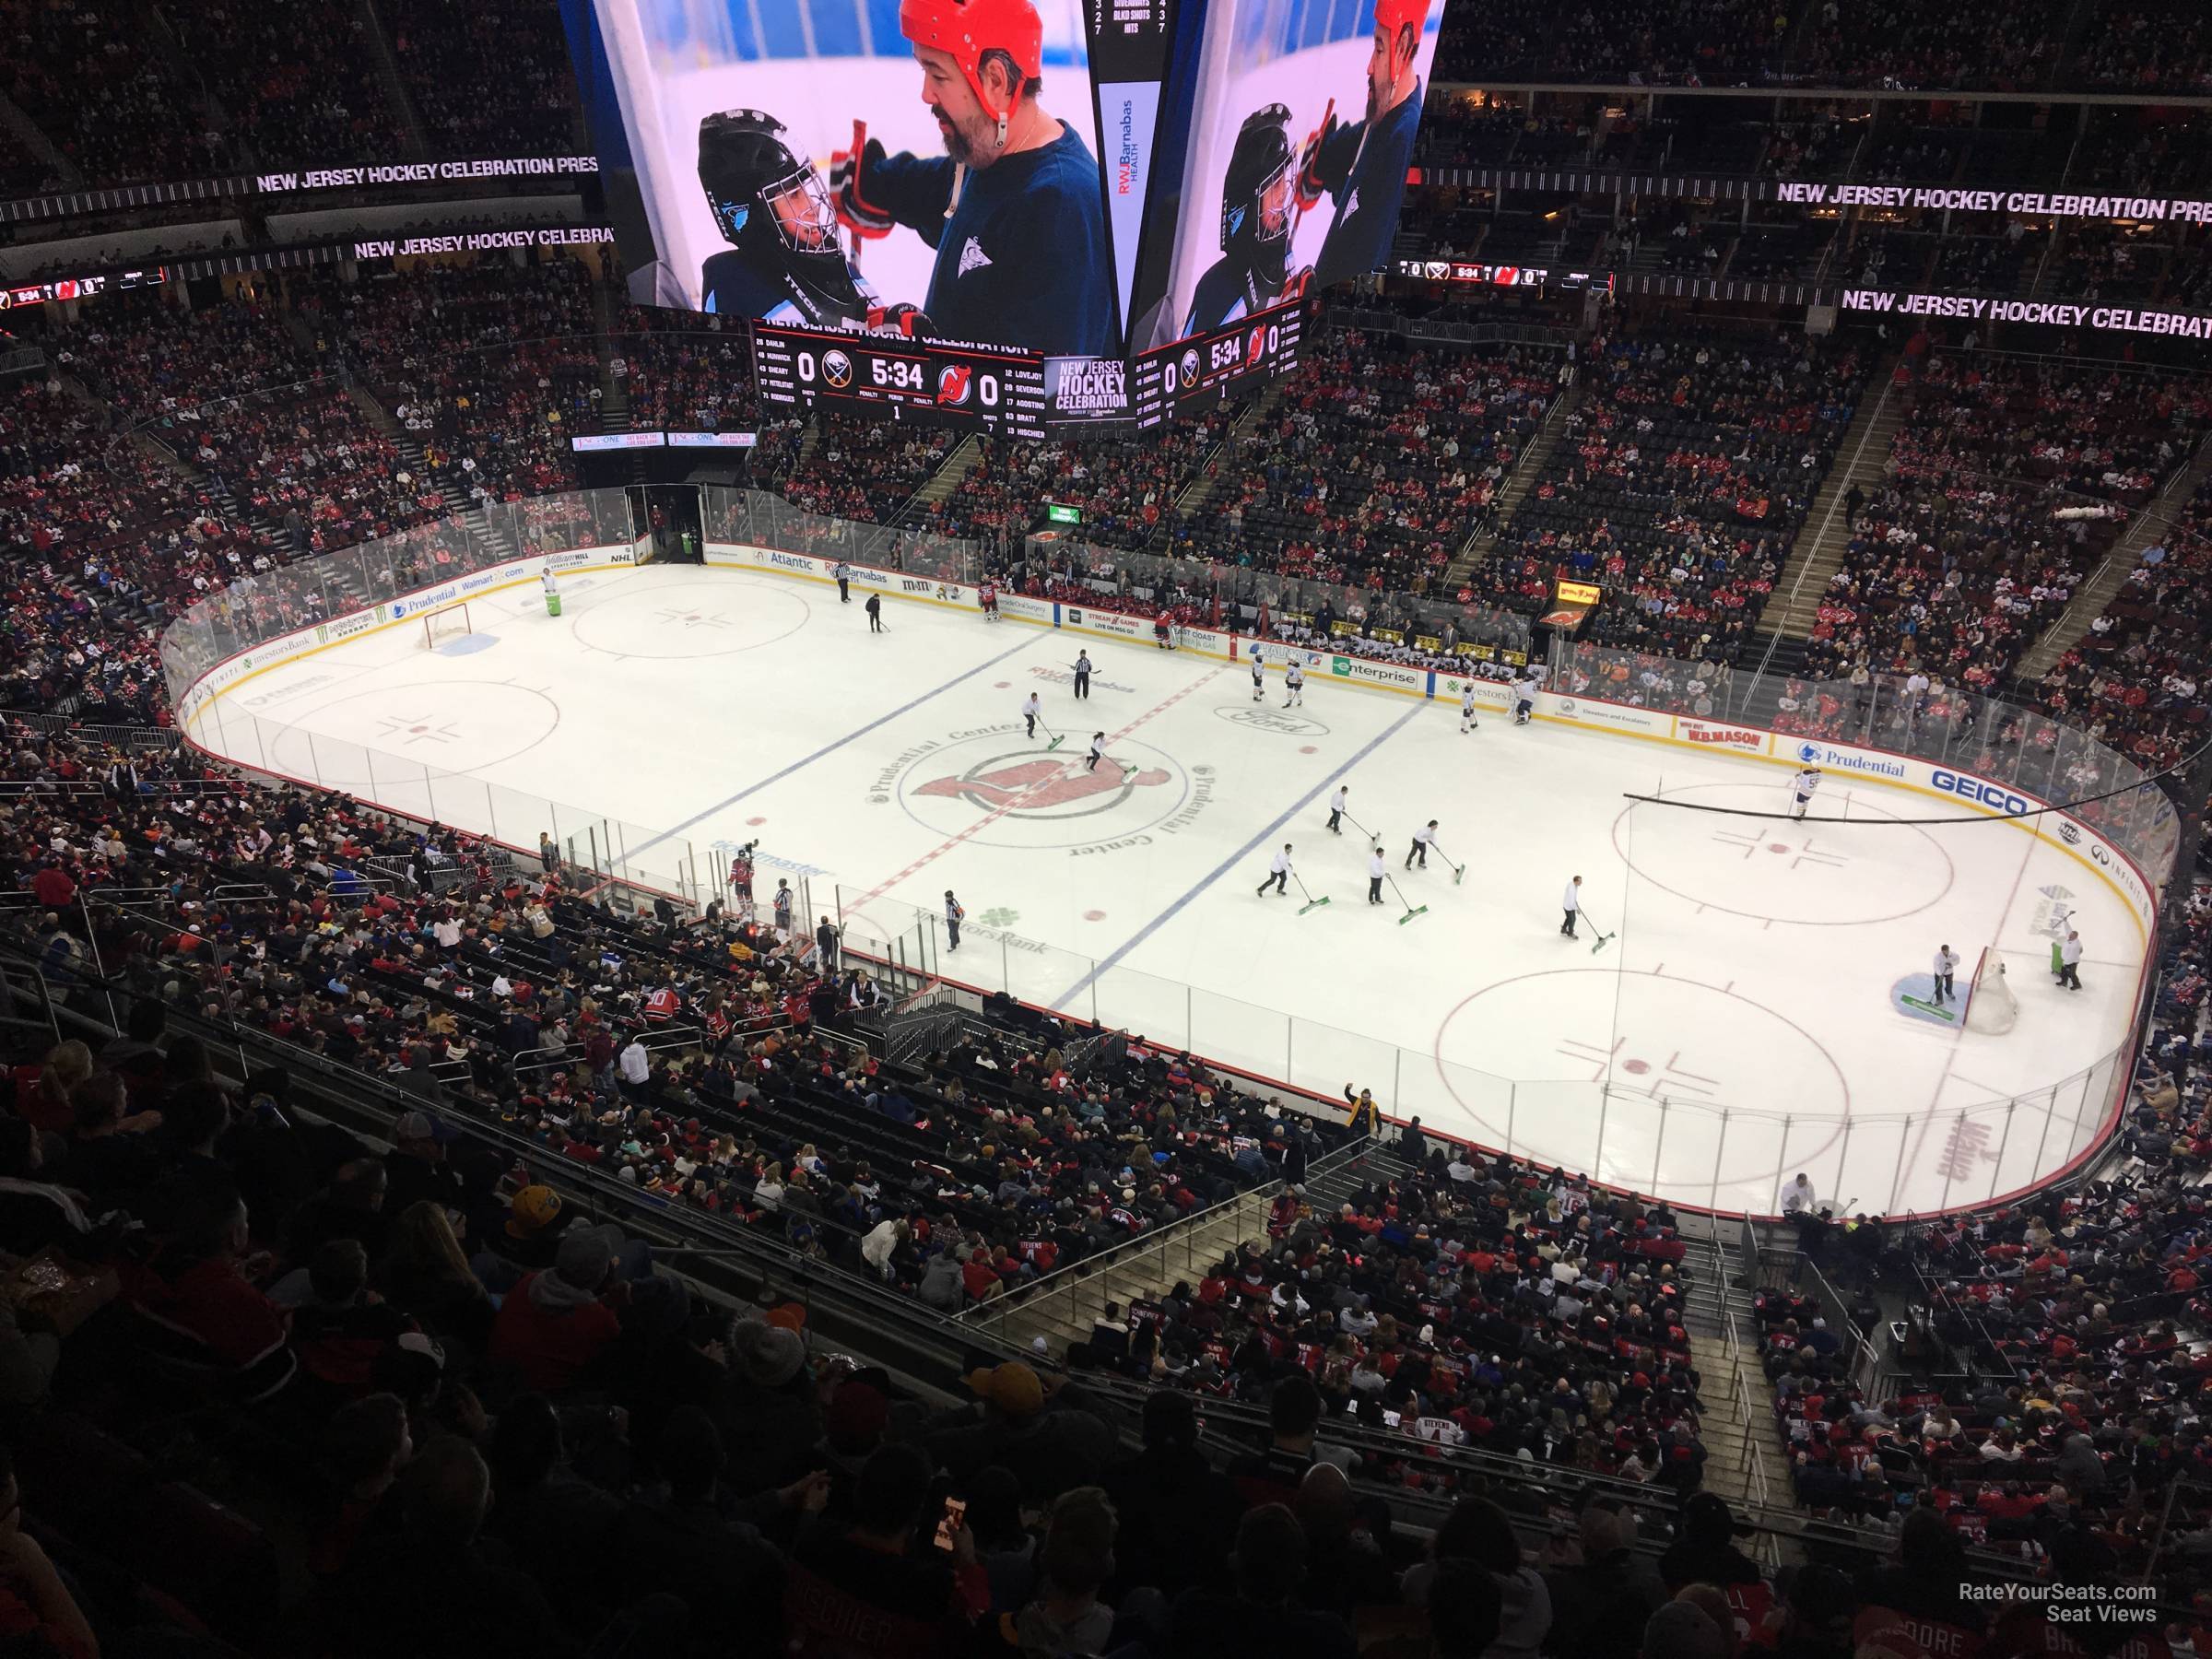 More fans allowed at Devils games as Prudential Center capacity